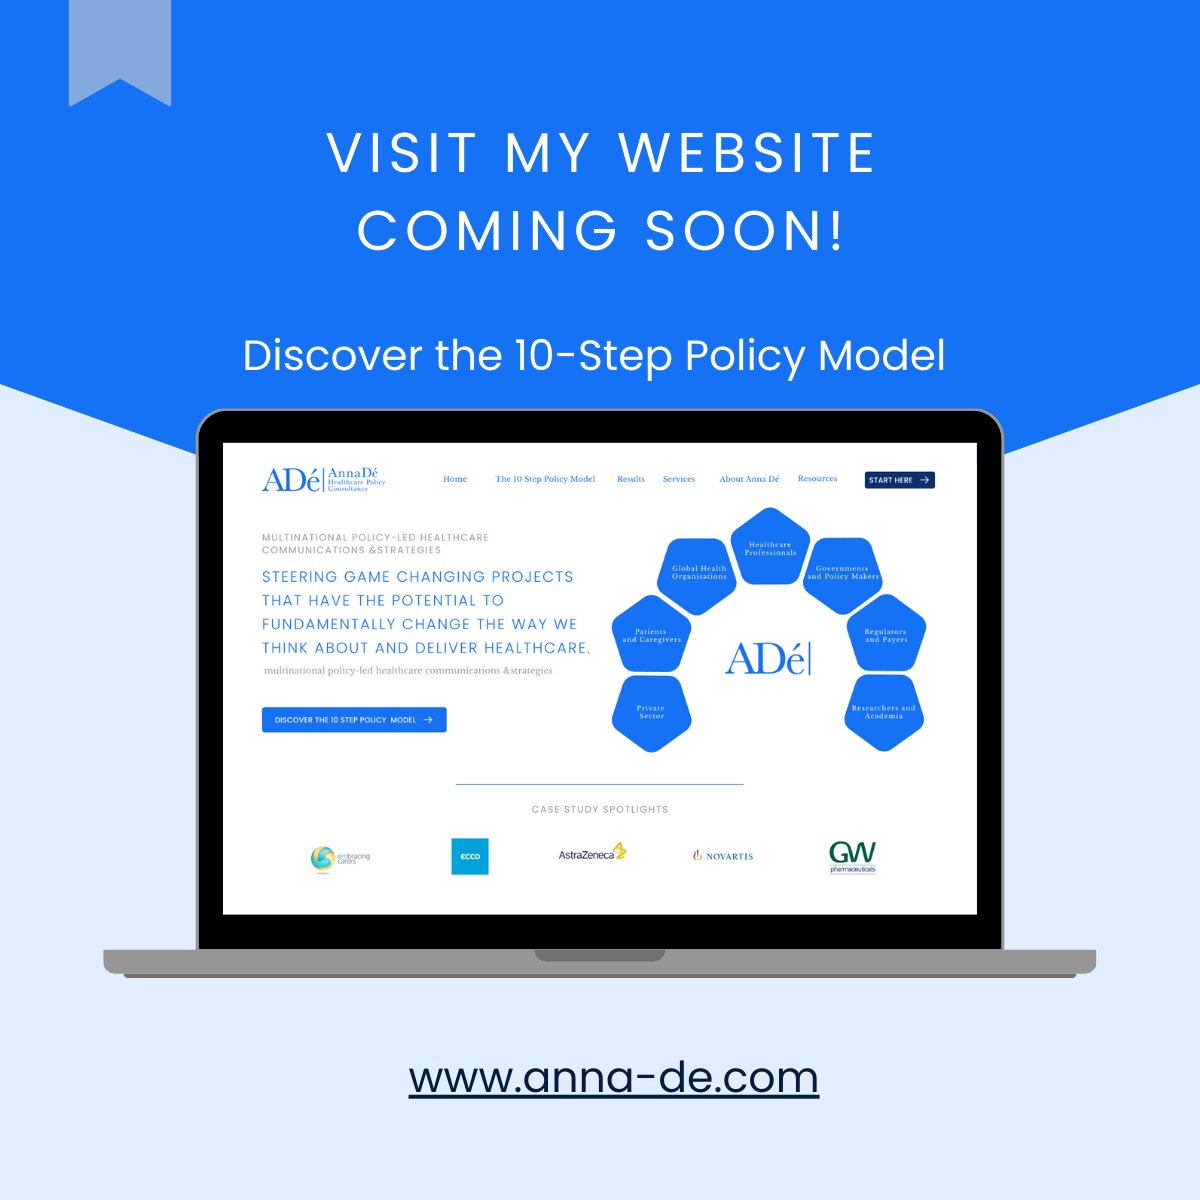 I am thrilled to announce that Anna Dé - Healthcare Policy Consultancy is gearing up for a major relaunch! Soon, we'll be unveiling our revamped website! Watch this space! anna-de.com #HealthcarePolicy #Consultancy #Relaunch